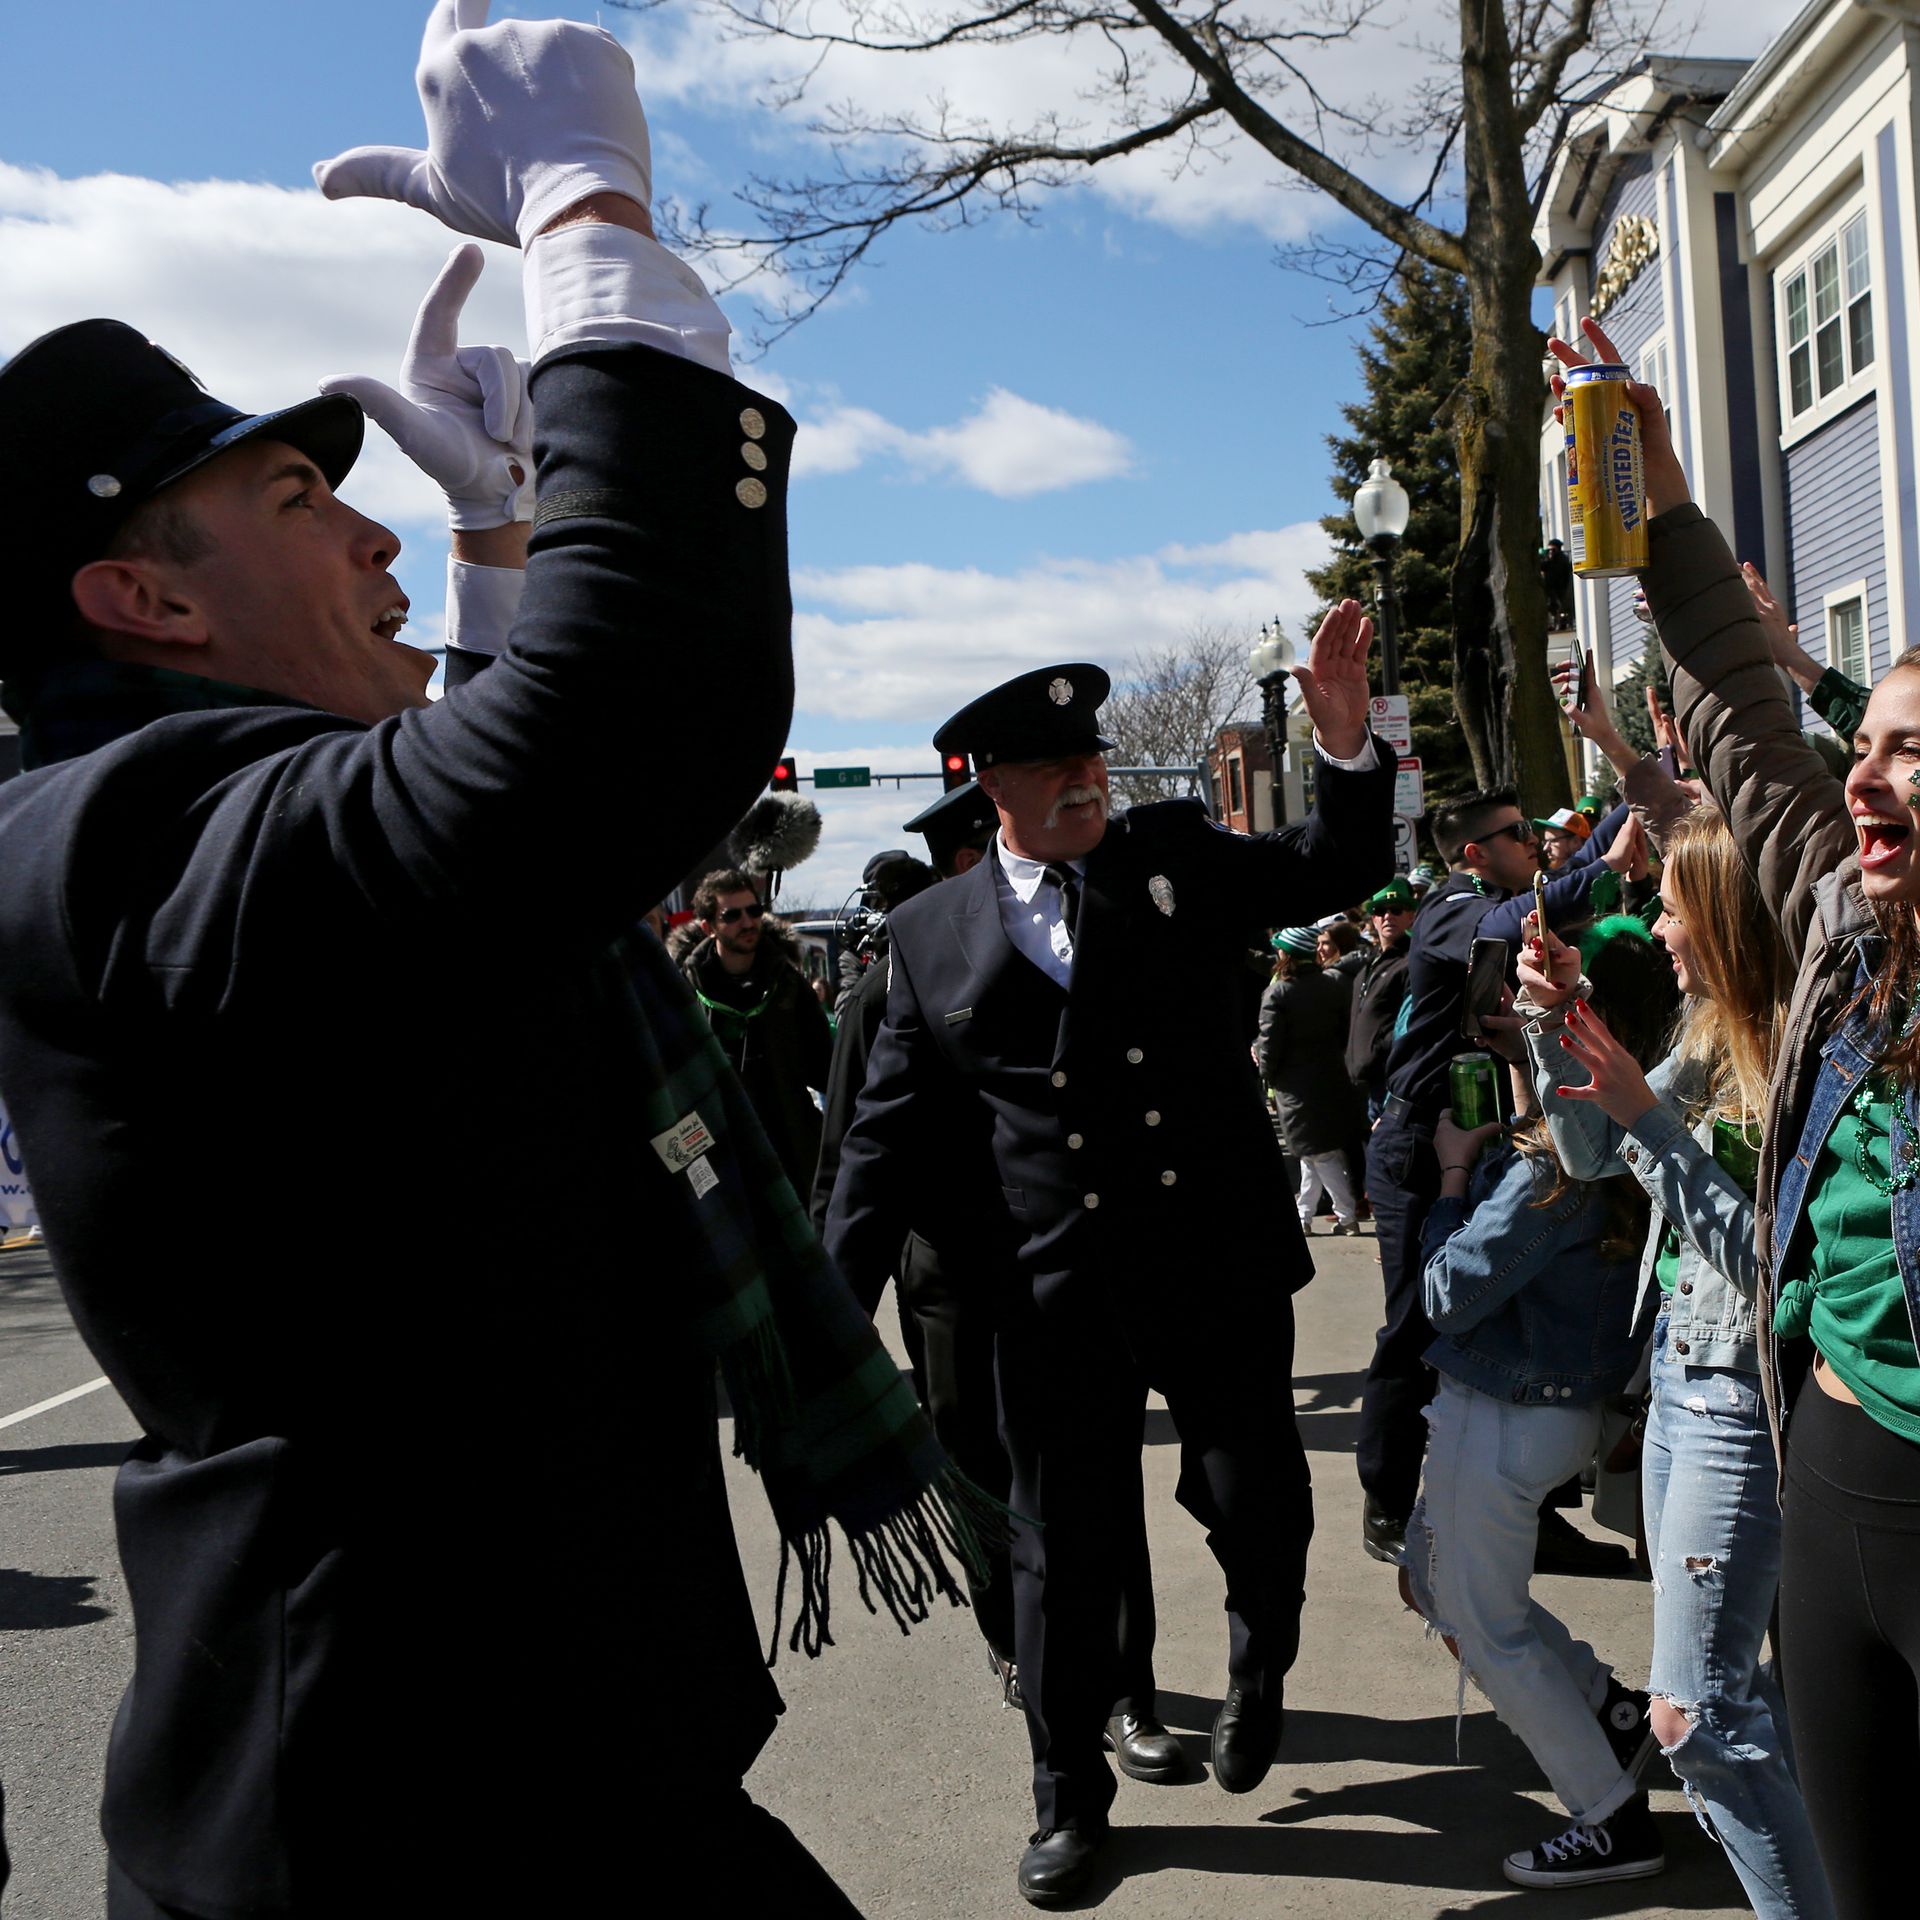 St. Patrick's Day in NYC 2023 Guide Including Irish Pubs and More